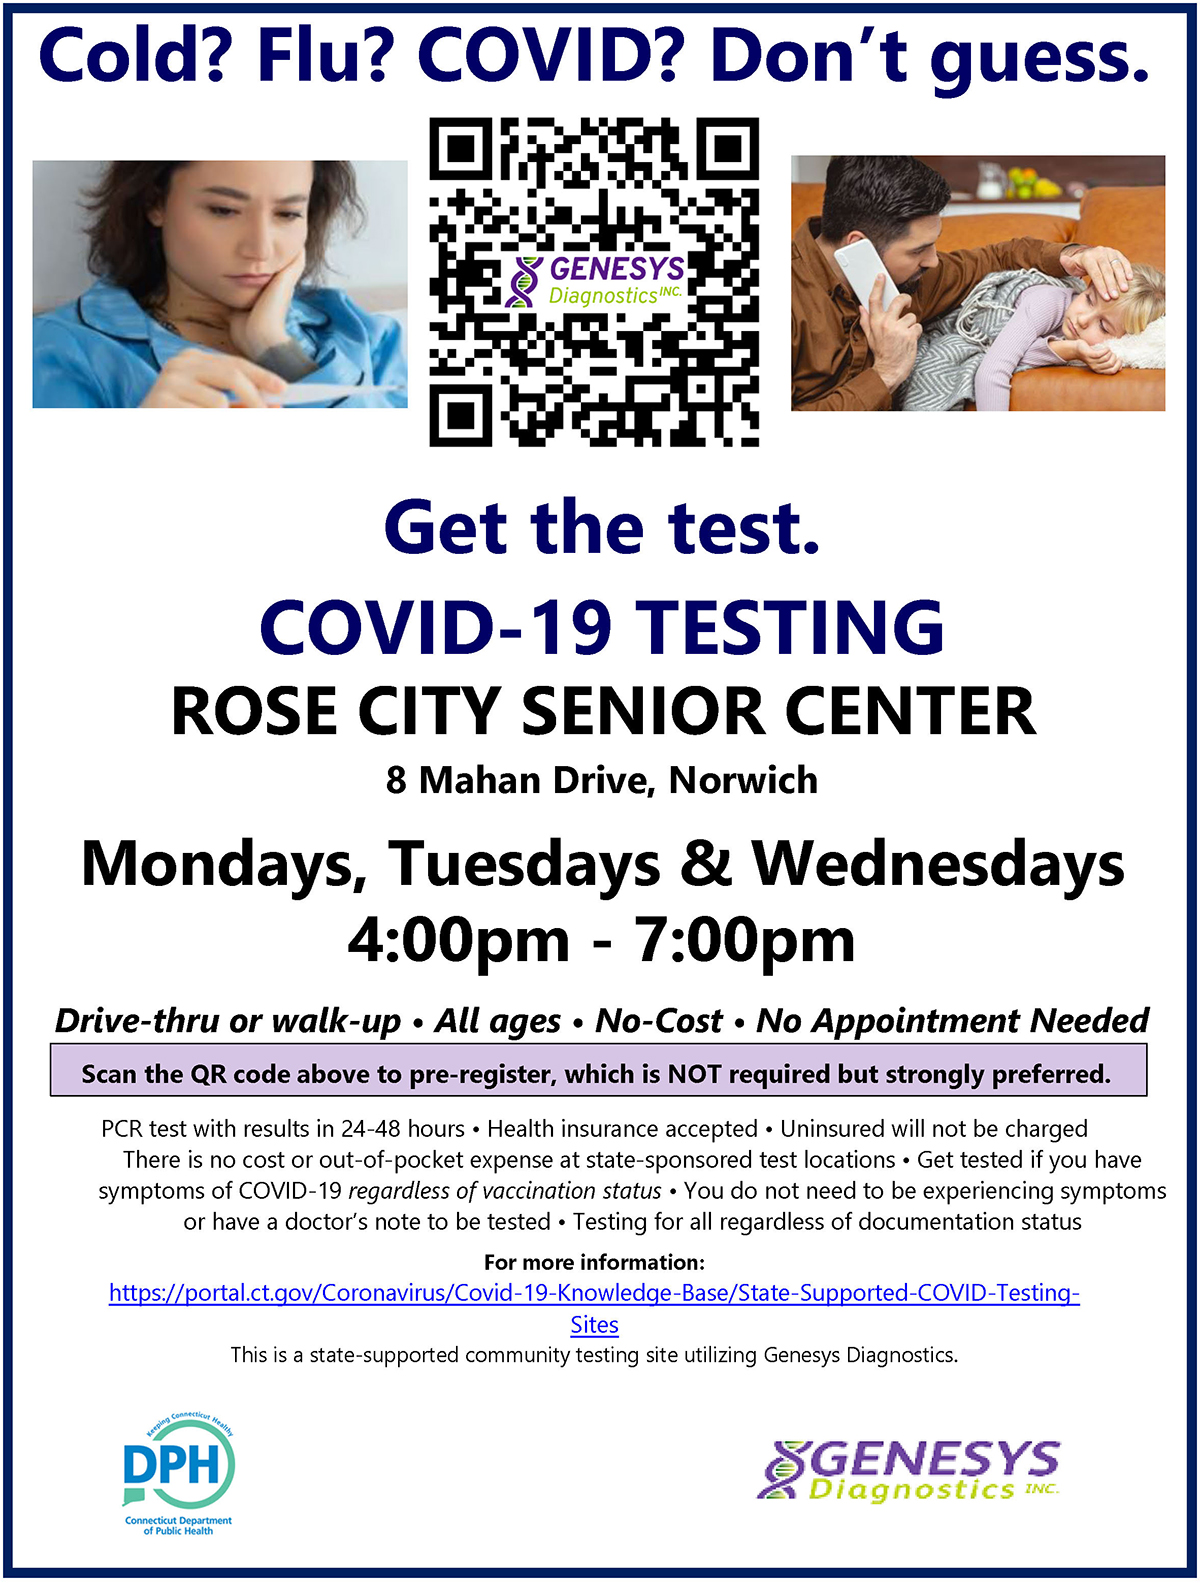 Cold? Flu? COVID? Don’t guess. Get the test. COVID-19 TESTING ROSE CITY SENIOR CENTER8 Mahan Drive, Norwich Mondays, Tuesdays & Wednesdays 4:00pm - 7:00pm